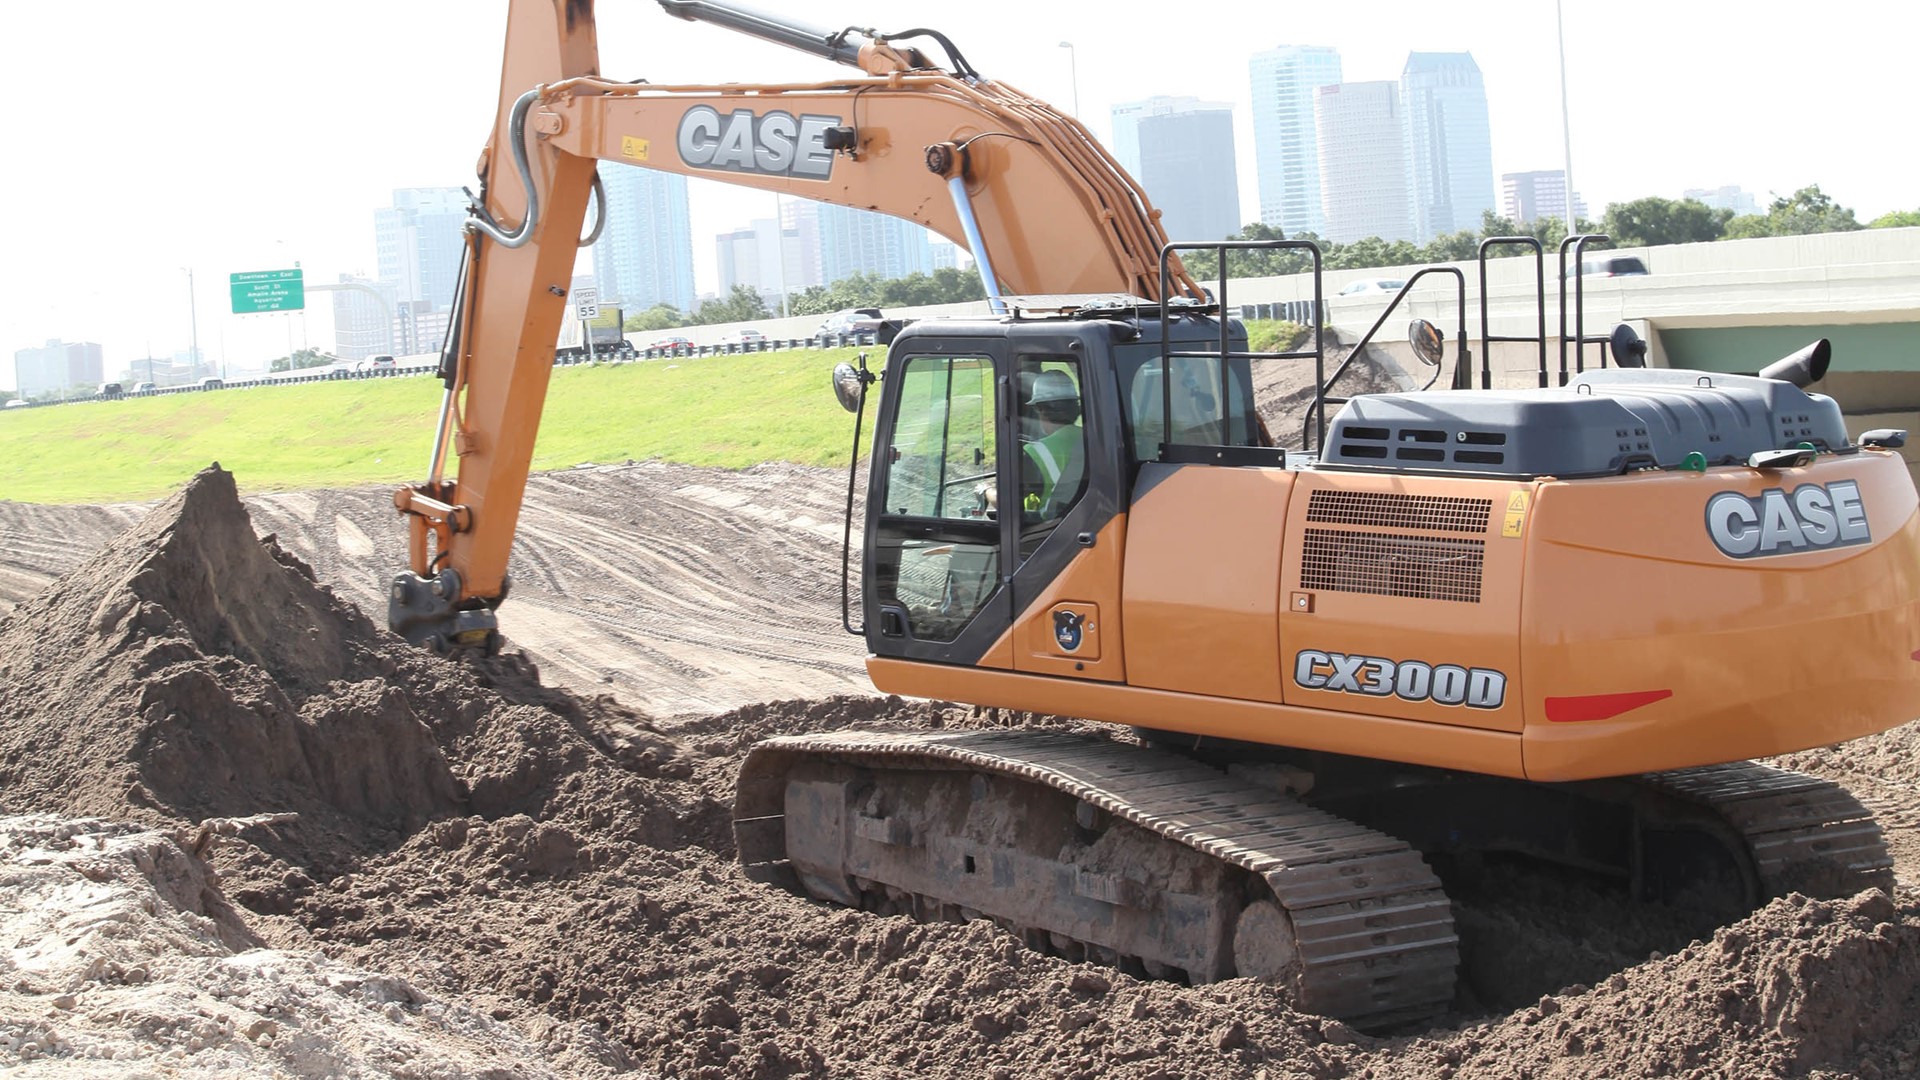 Webinar will go over key practices for controlling and lowering heavy equipment operating costs